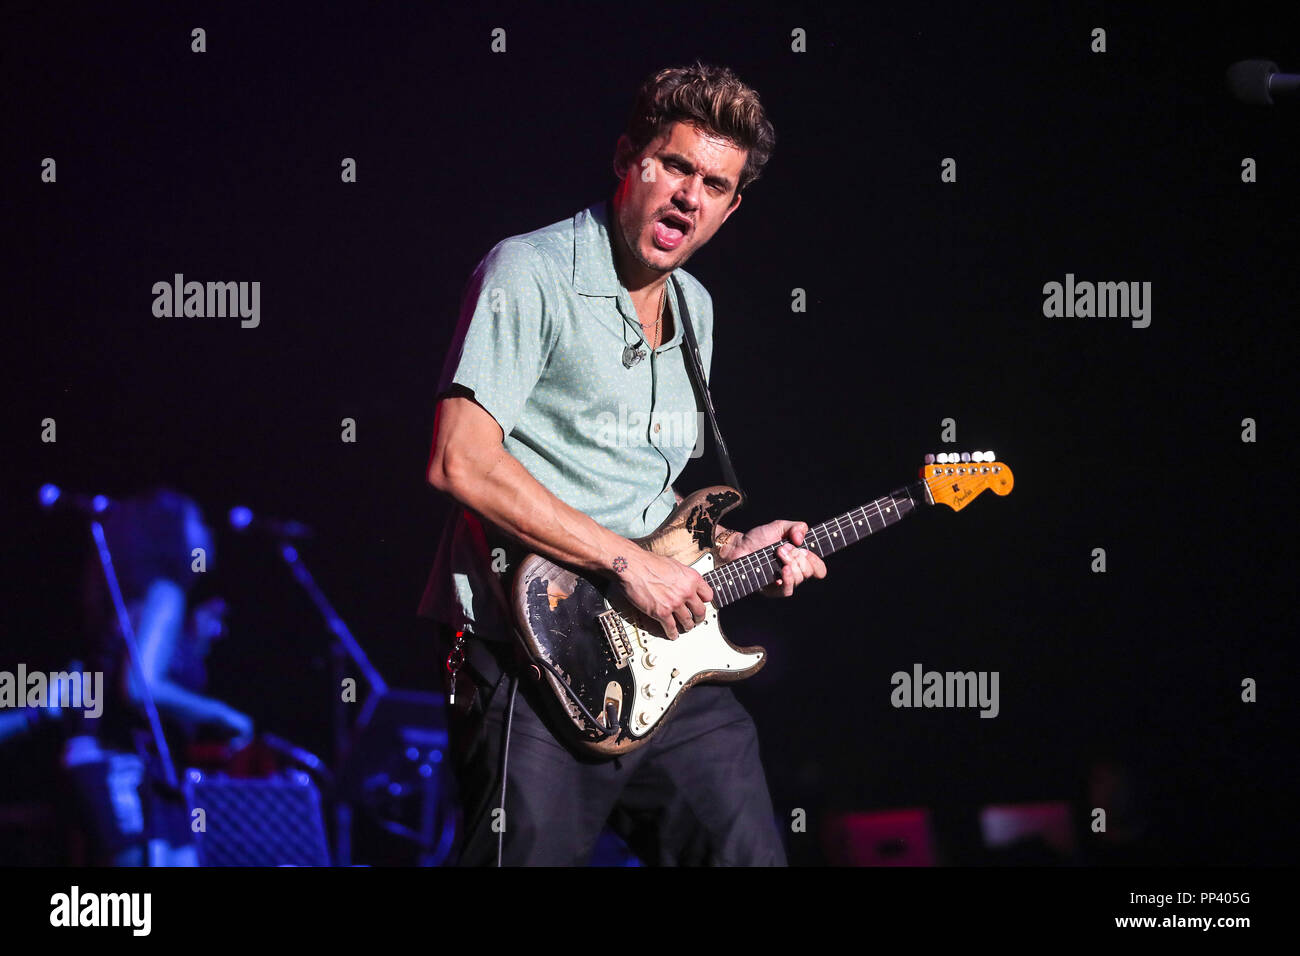 Music Artist JOHN MAYER performs in North Carolina as part of his 2017 Tour.   John Clayton Mayer is an American singer-songwriter, guitarist, and record producer. Stock Photo